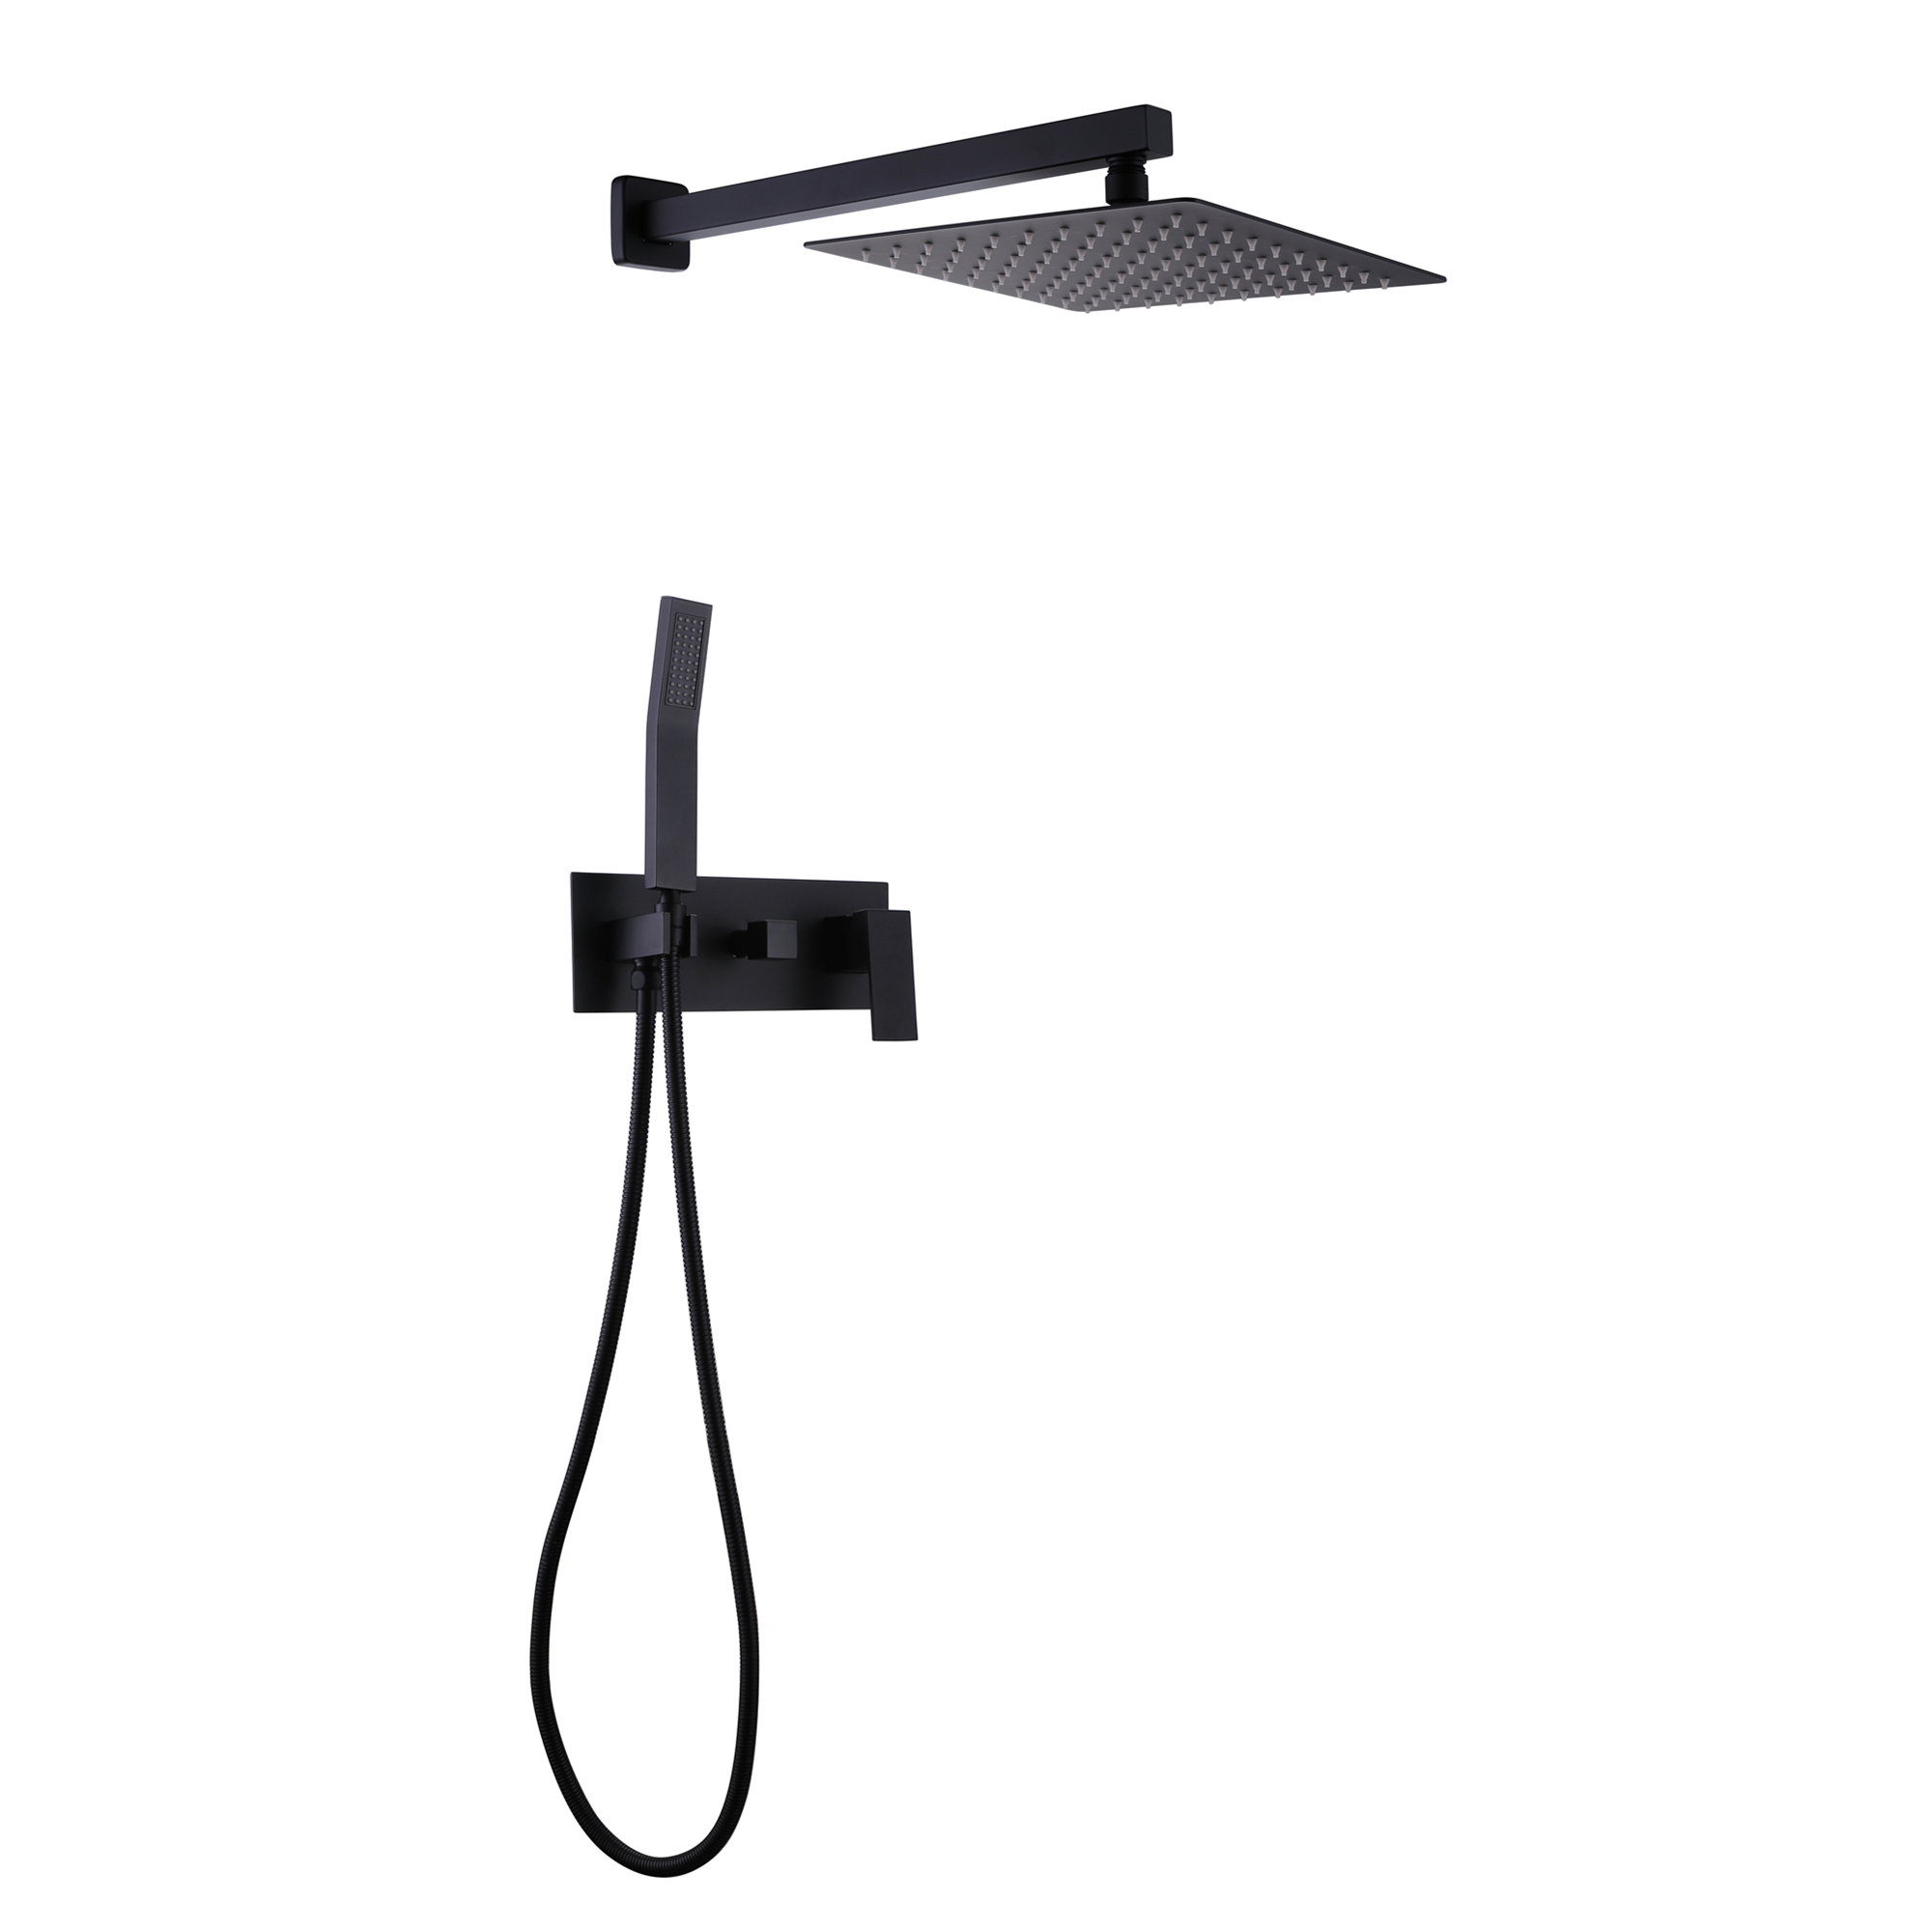 Trustmade 12 Inches Matte Black Shower System Bathroom Luxury Rain Mixer Shower Combo Set Wall Mounted Rainfall Shower Head System, Rough-in Valve Body and Trim Included - 2W01-CASAINC